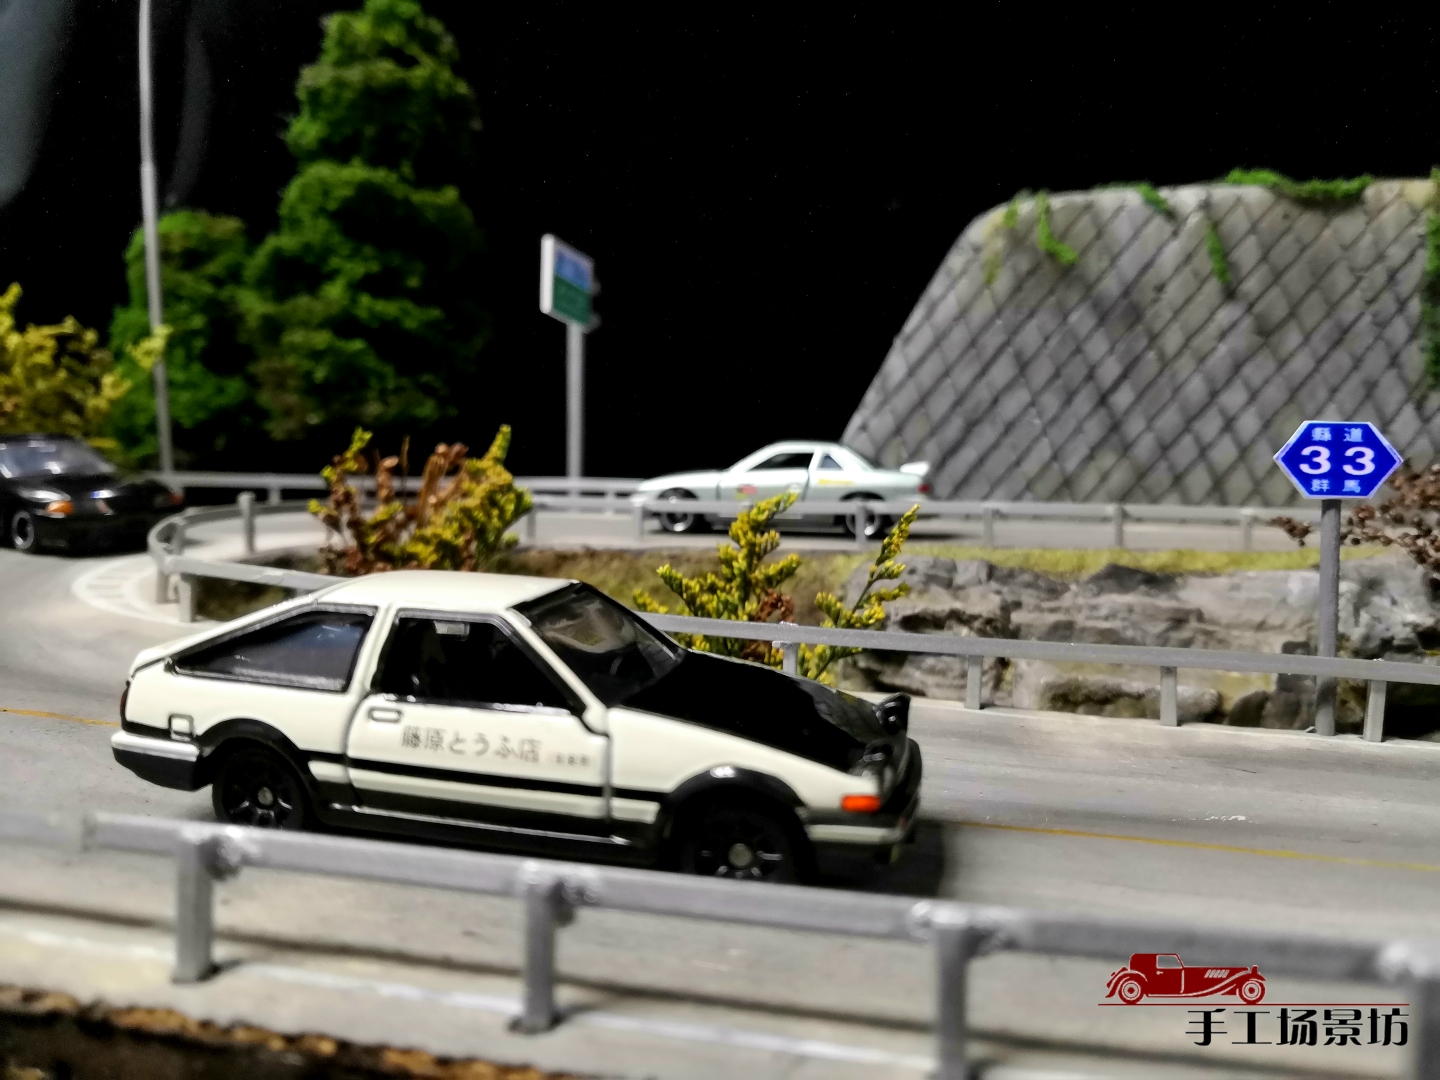 1:64 scale Diorama, Initial D Akina Mountain Racing scene. suitable for 1/64 scale Die-cast model car 1/64 matchbox cars, Hot Wheels, TOMICA cars, takumi cars.